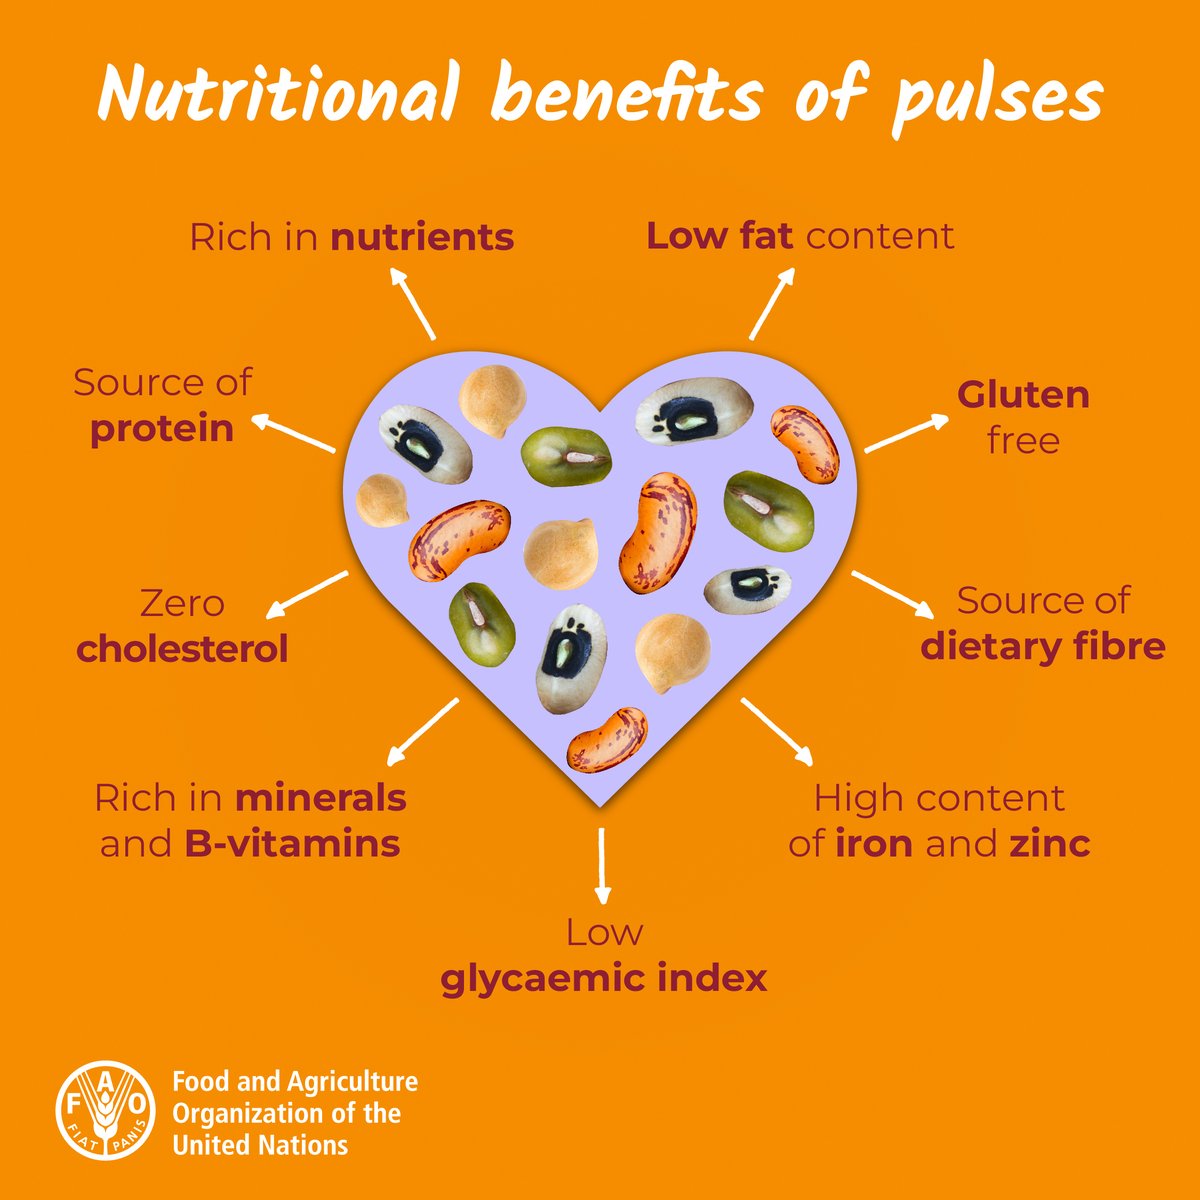 Pulses are our delicious ally in achieving food security, and reducing malnutrition.

#WorldHealthDay #BetterNutrition